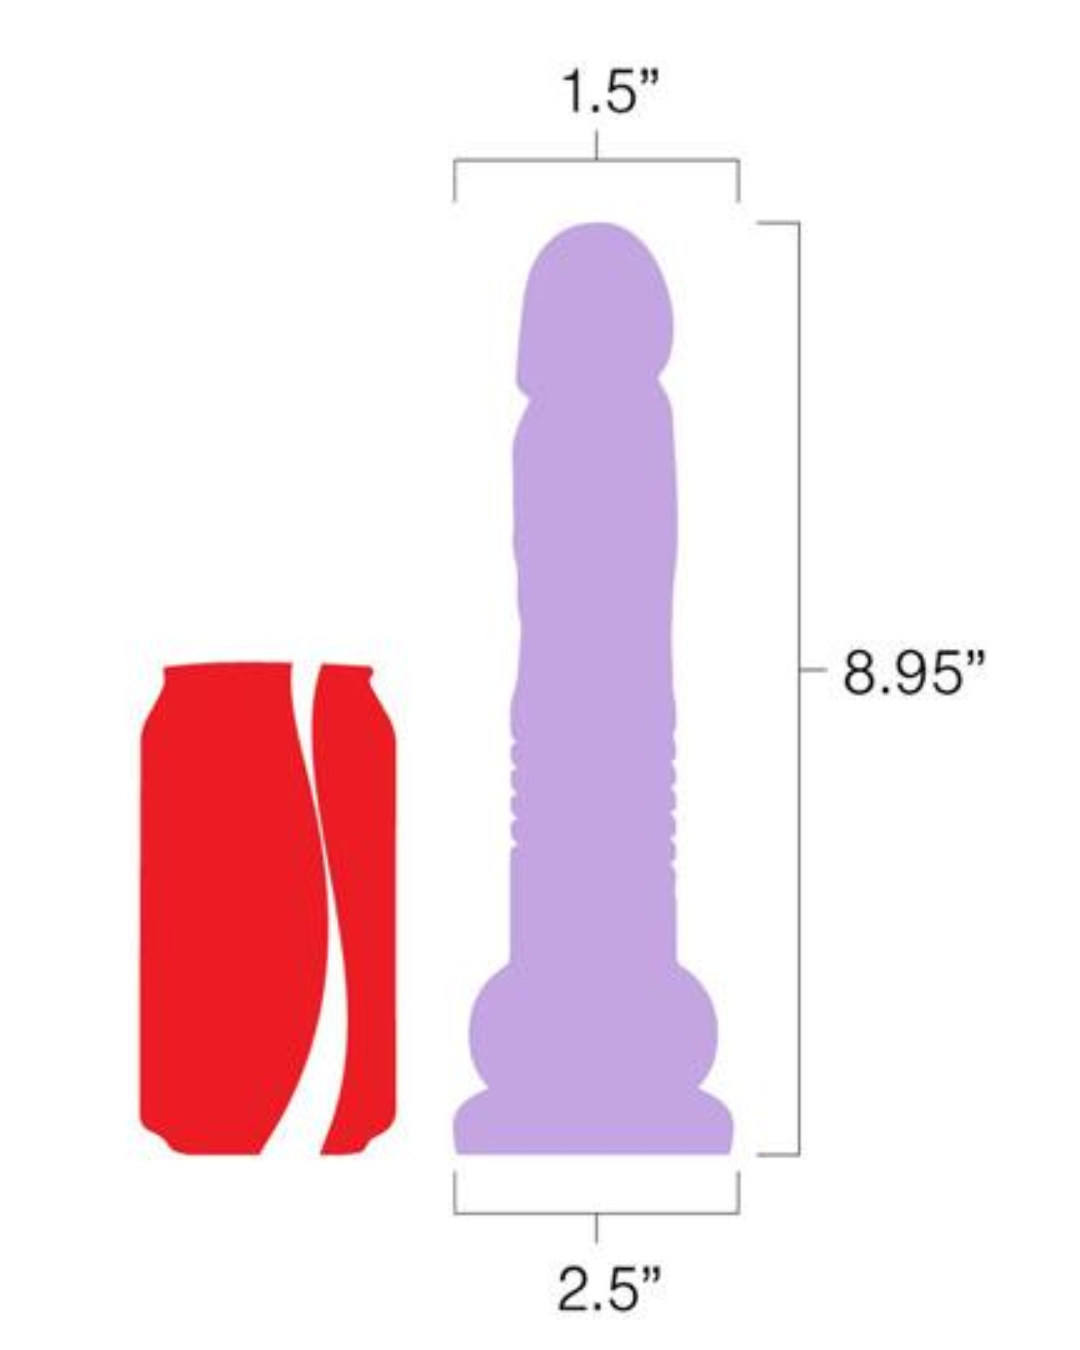 The Thruster Mini Teddy Powerful Thrusting Silicone Dildo - Lilac Zen with soda can for scale